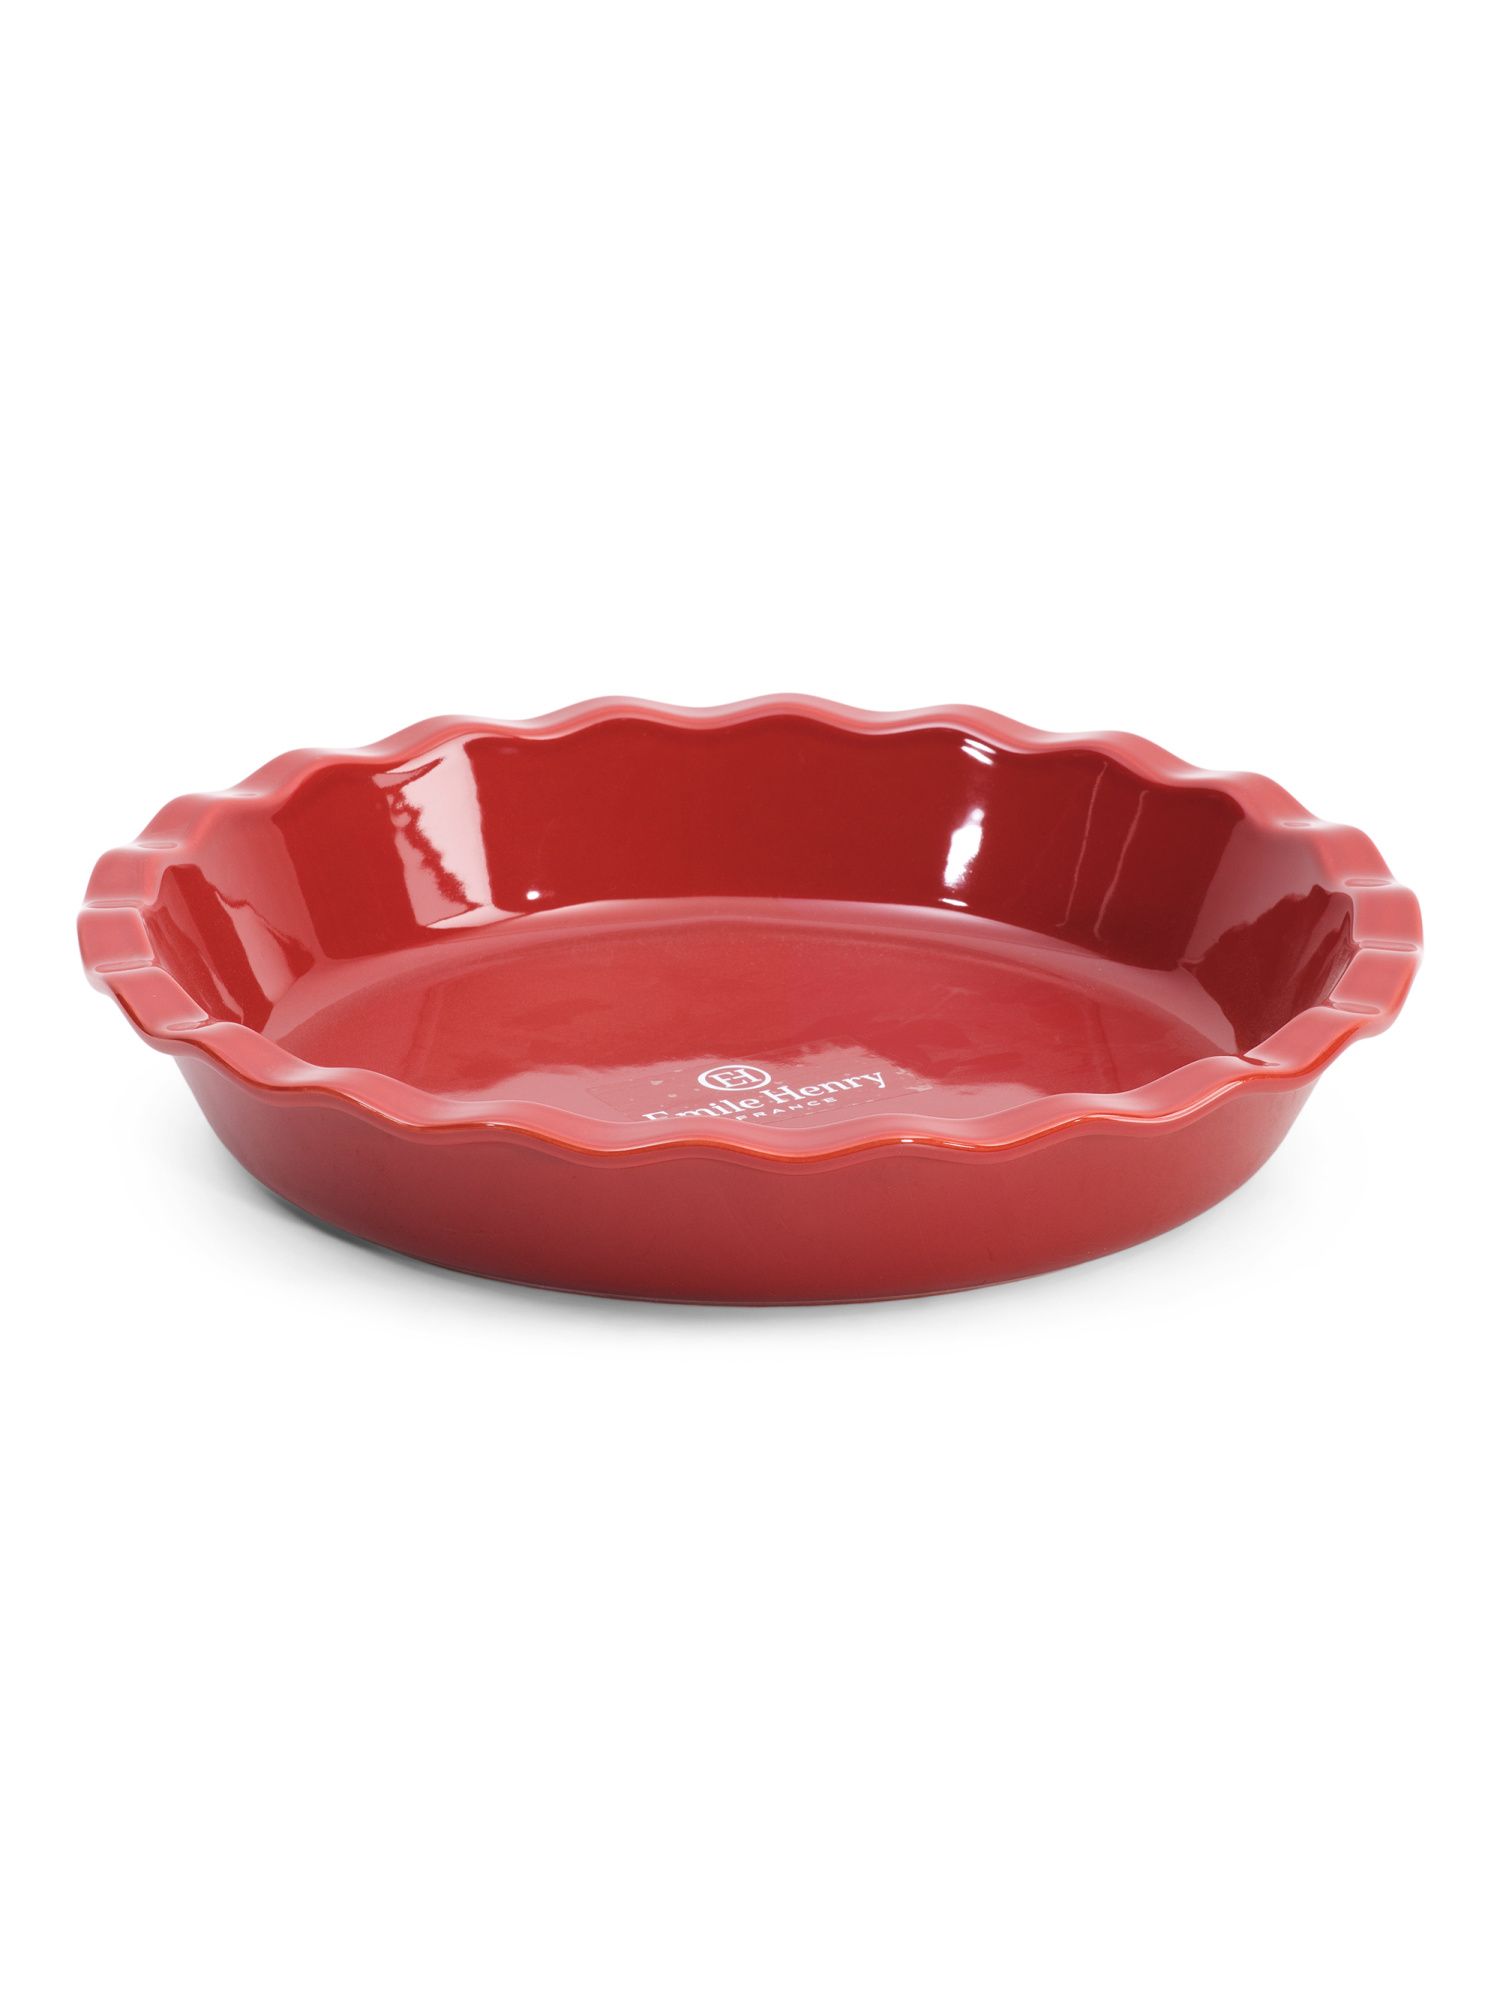 Made In France Le Grande Pie Dish | The Global Decor Shop | Marshalls | Marshalls